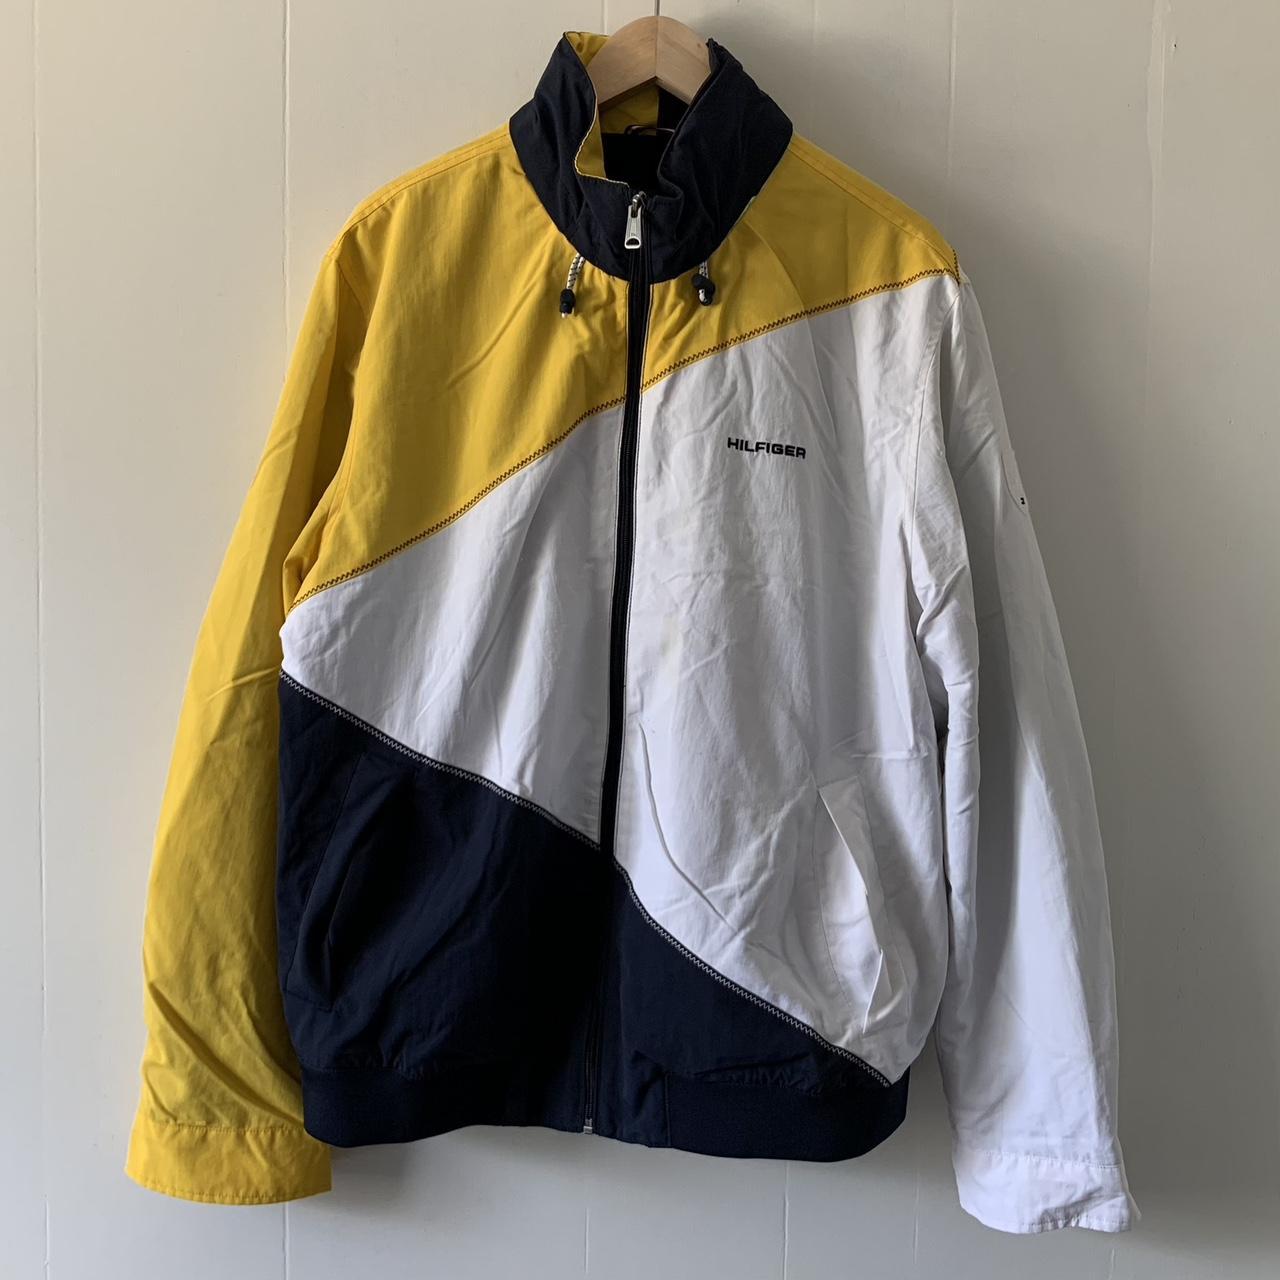 Tommy Hilfiger Men's White and Yellow Jacket | Depop